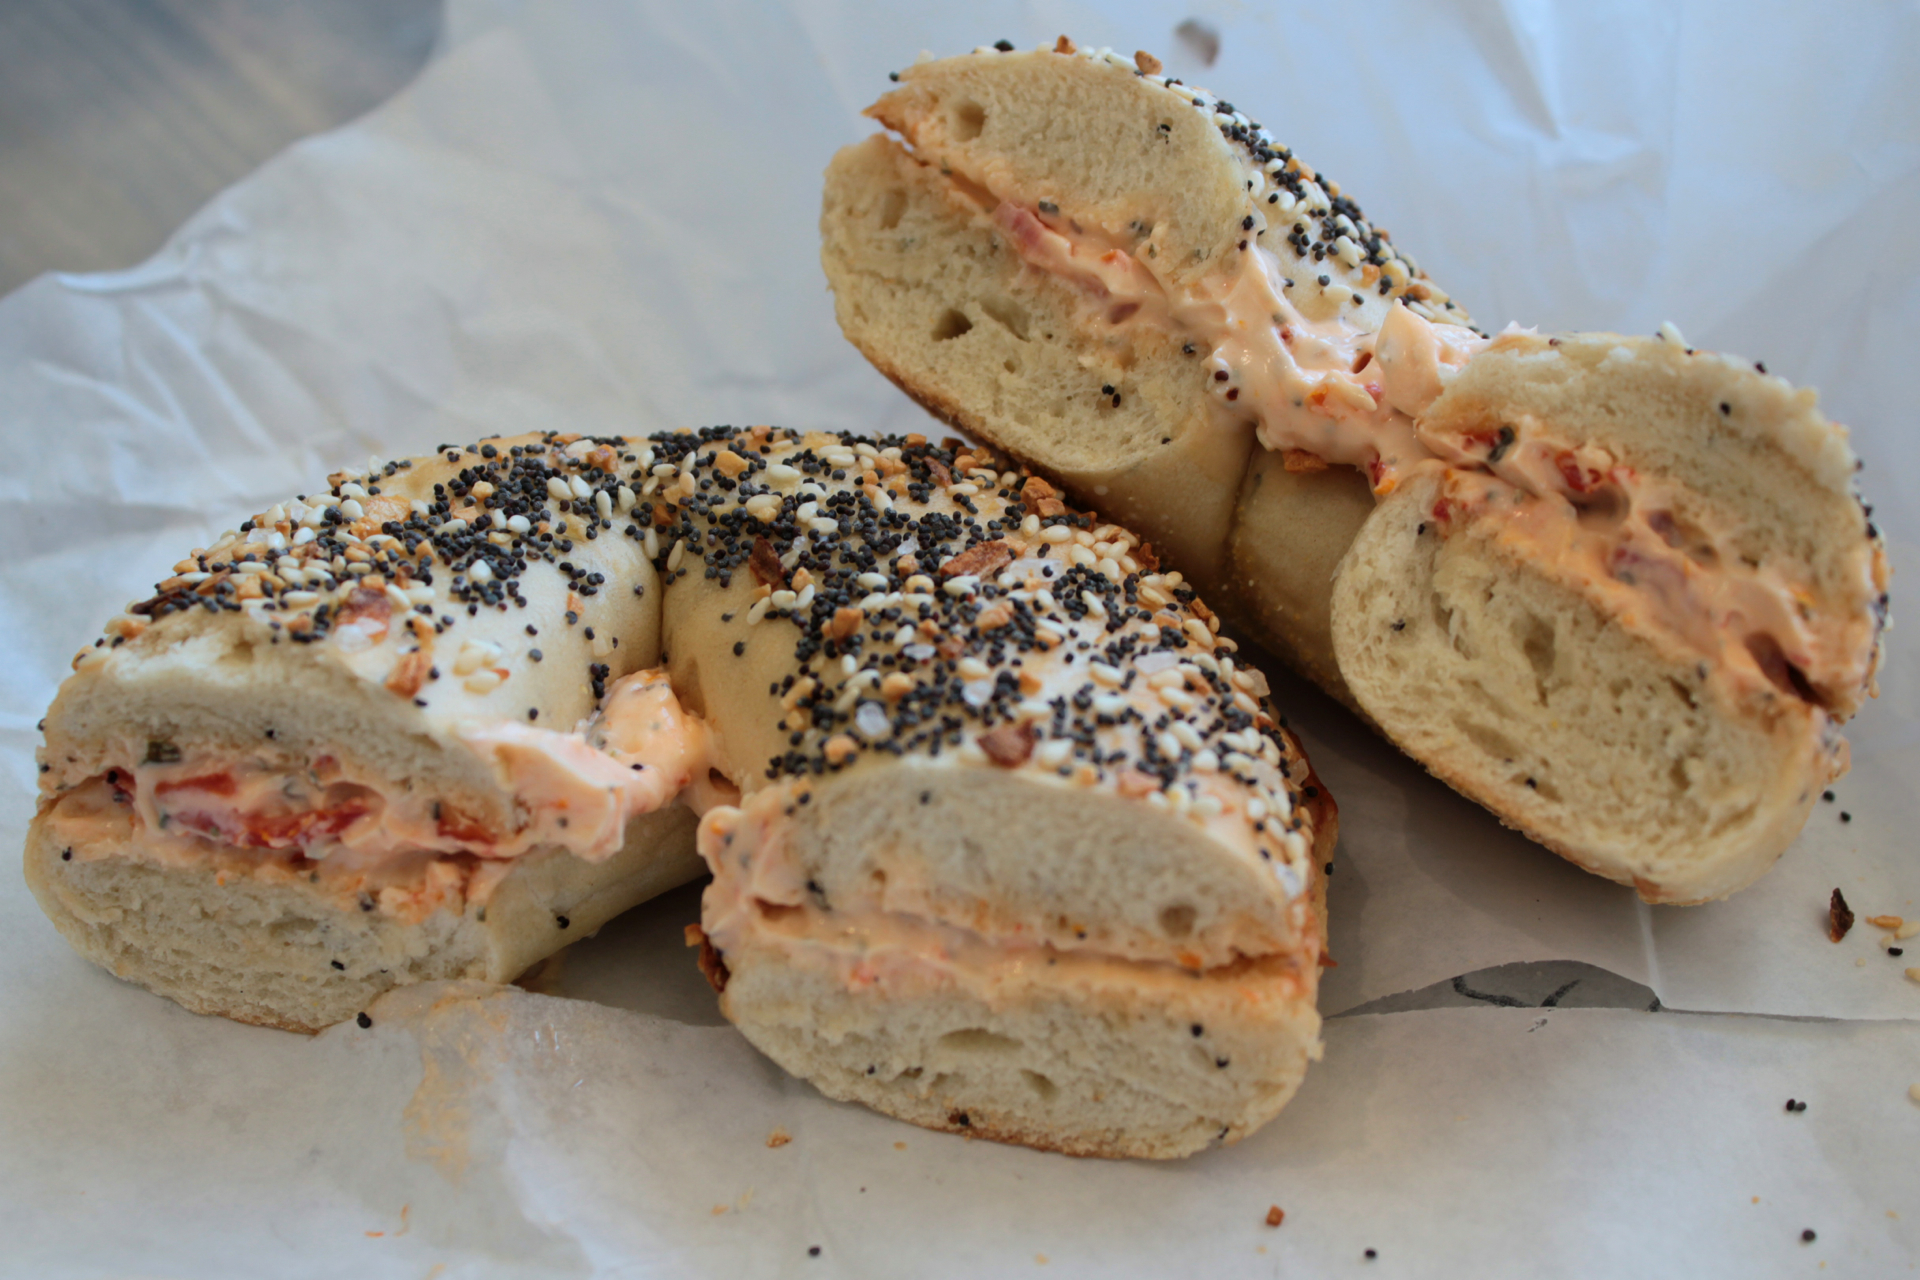 An everything bagel with sun-dried tomato cream cheese.